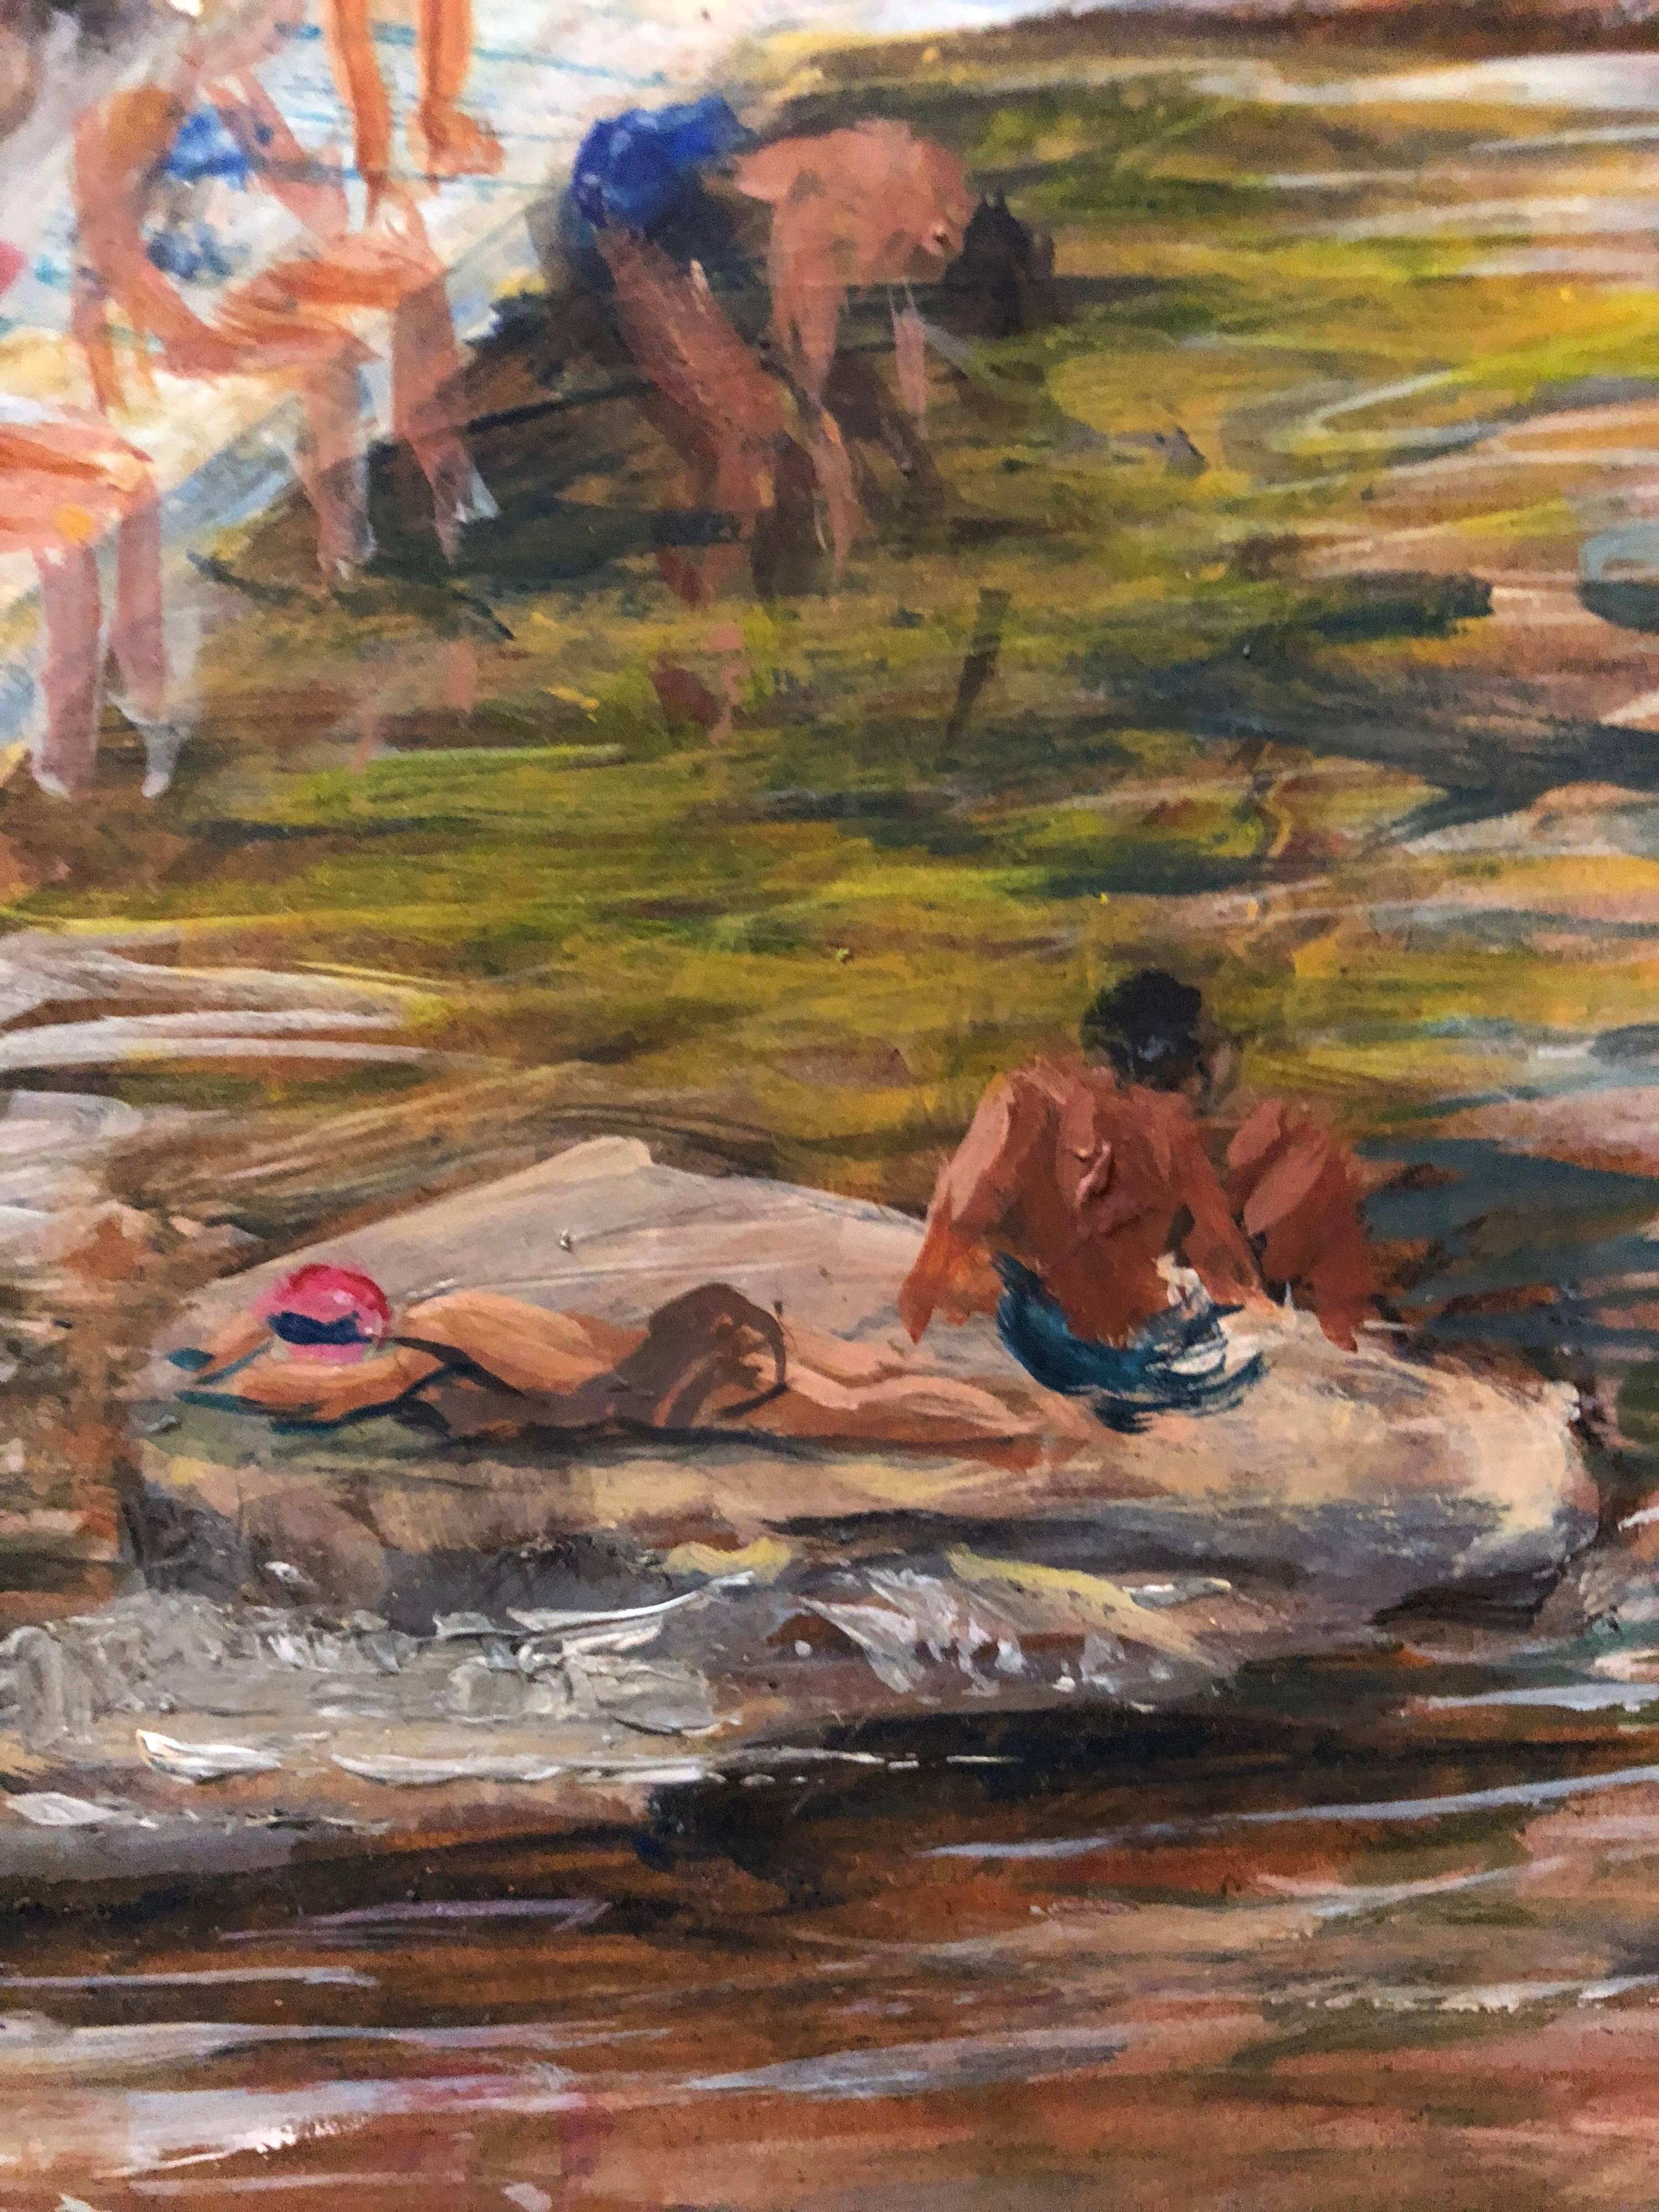 Swimmers and sun tanners at the local watering hole. 

Her birth name was Theresa Berney. At the time of her passing she was known as Theresa Loew.
Birth place: Baltimore
artist, block printer, drawing specialist, etcher, painter
Studied with Henry